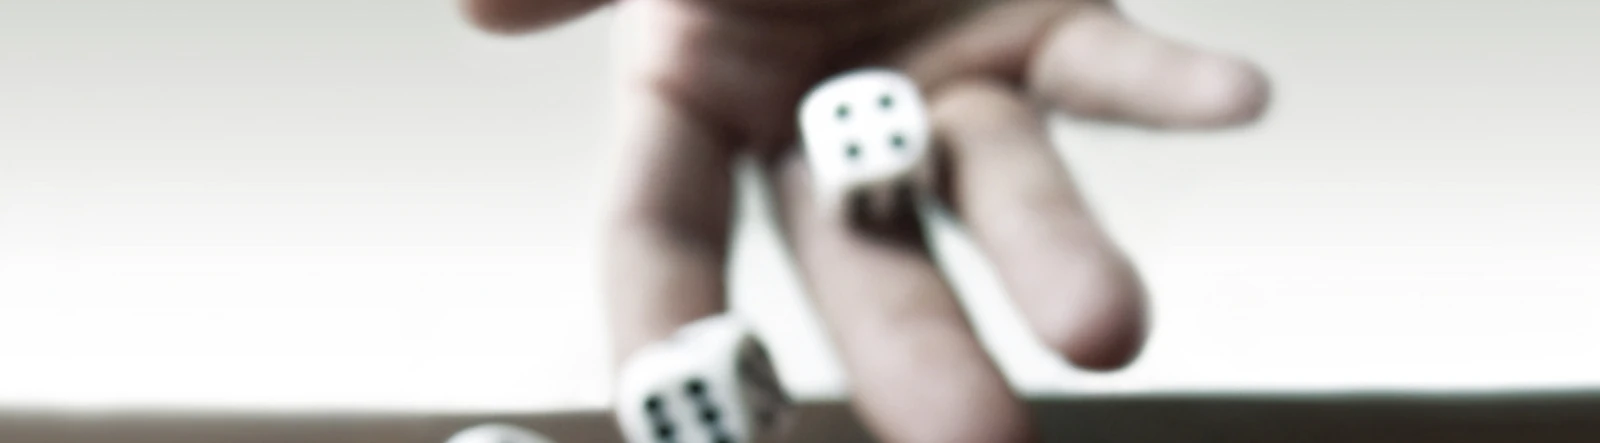 A hand throwing two dice